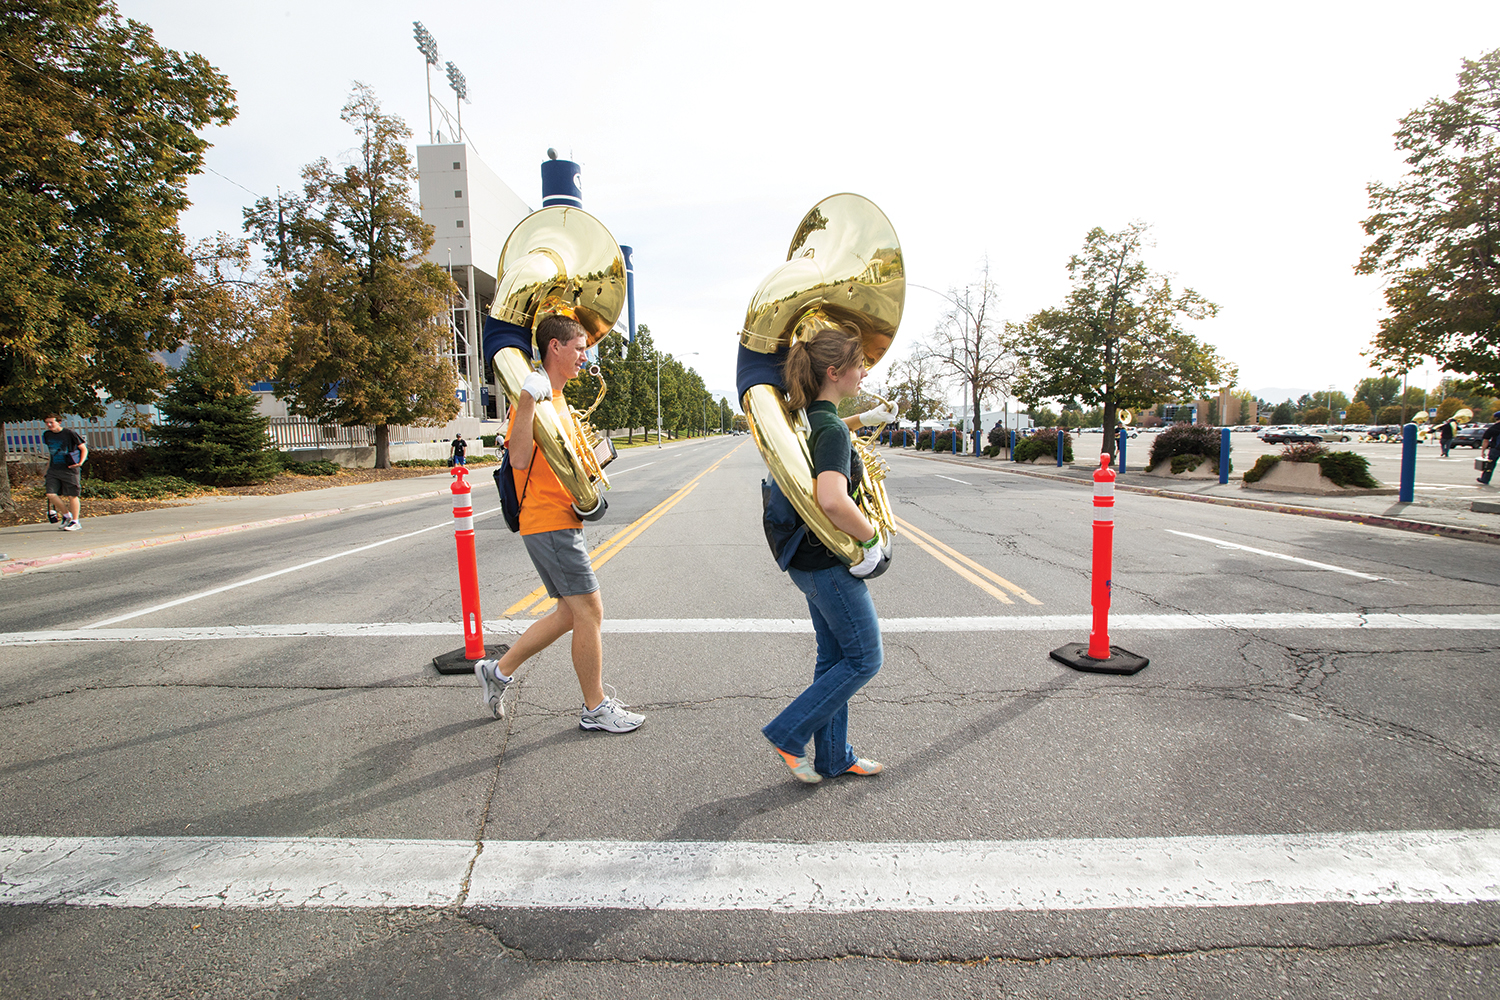 BYU band members on their way to practice.